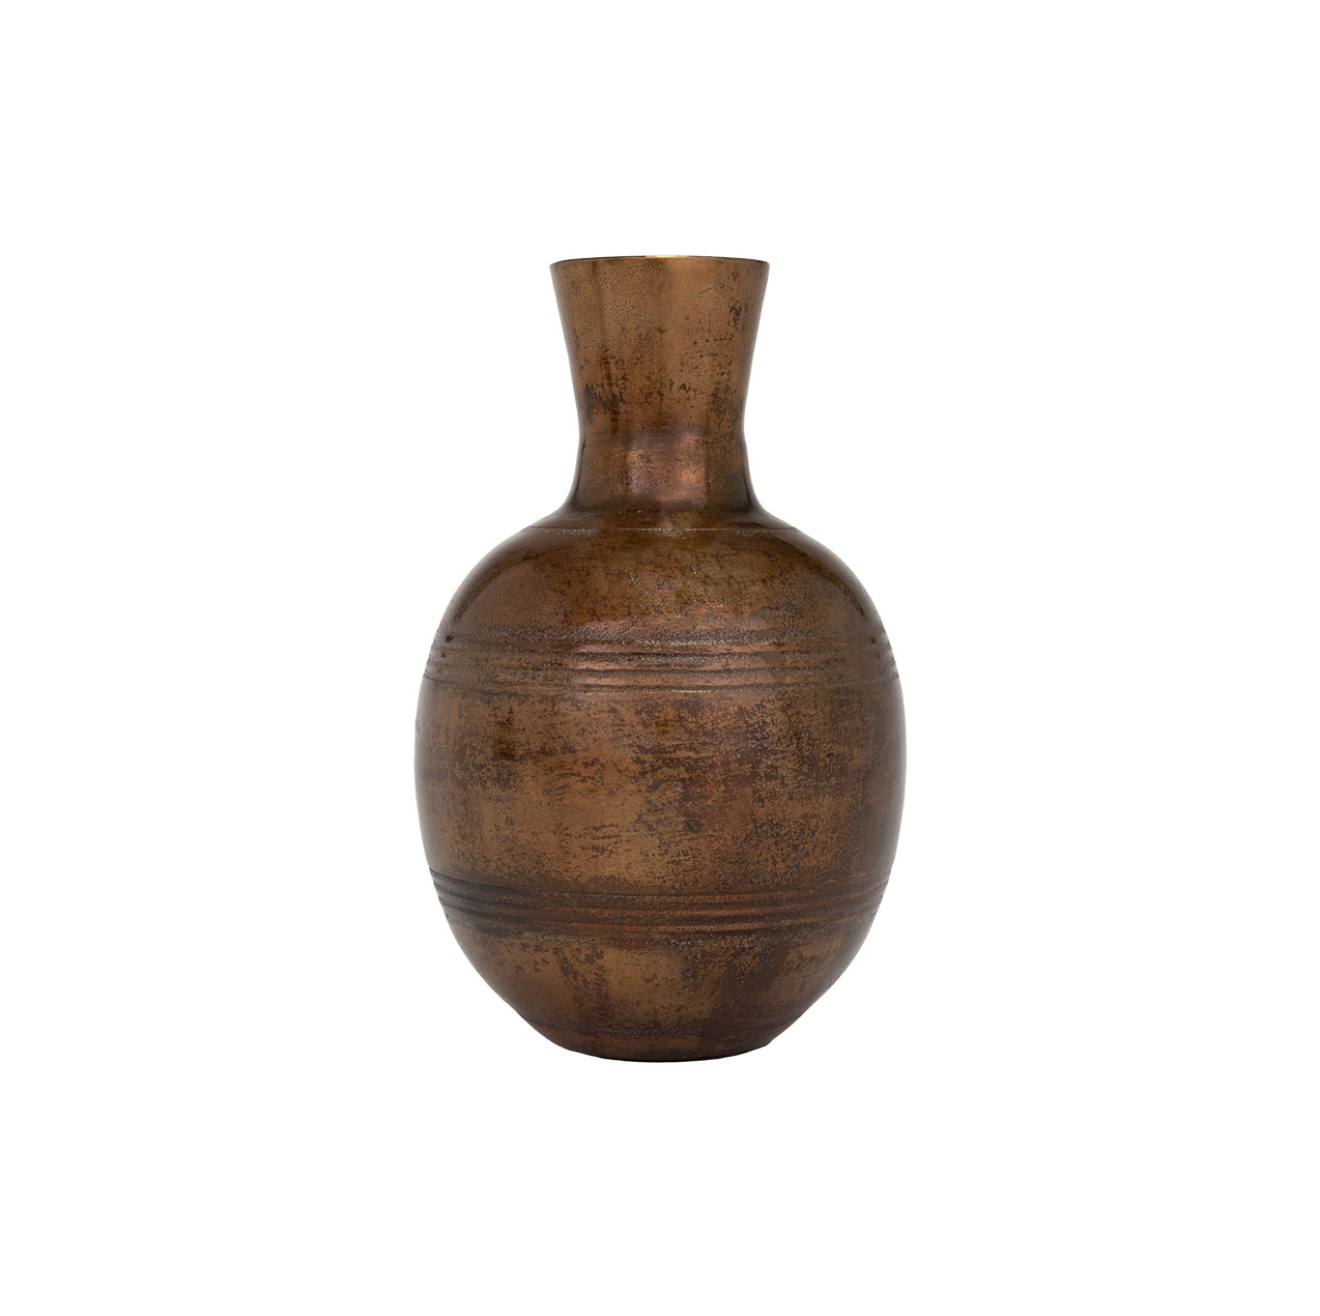 A round Jaques S vase with a narrow neck and a rustic brown finish, featuring a subtle speckled pattern, evoking the essence of Scottsdale Arizona, isolated on a white background by The Import Collection.